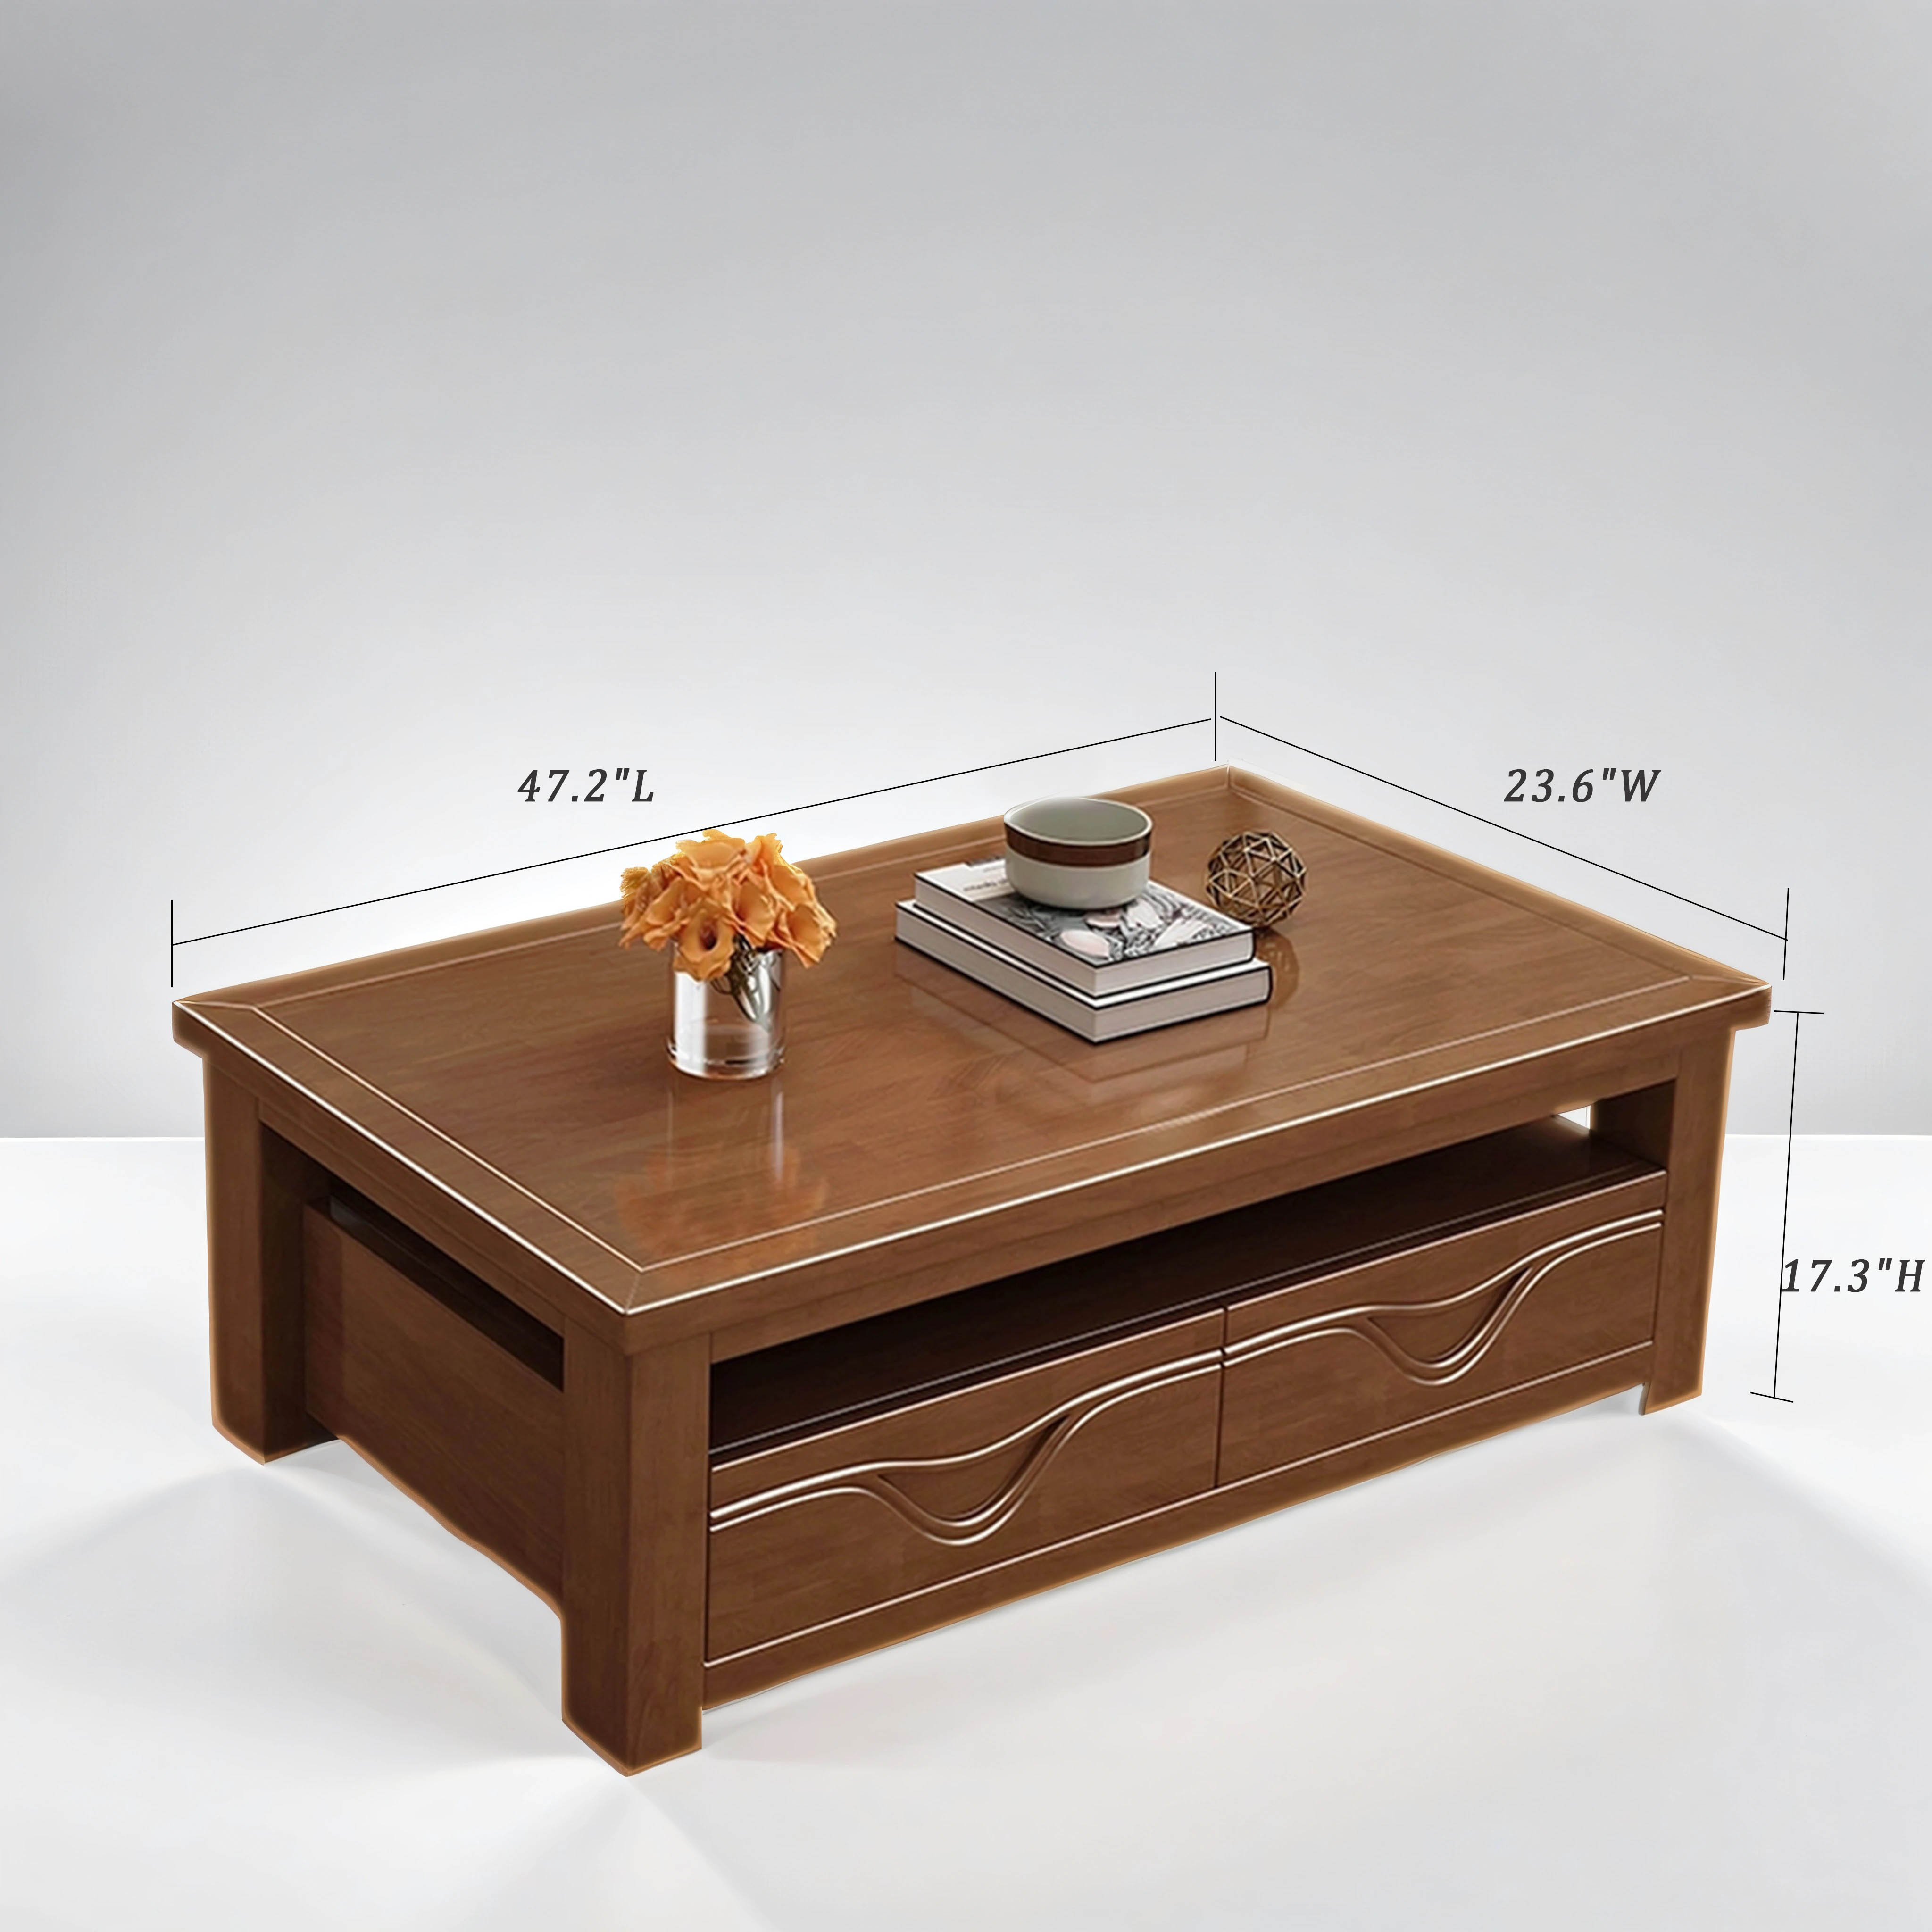 Solid Wood Coffee Table with Minimalist Design, Living Room Tea Table with Drawer Storage